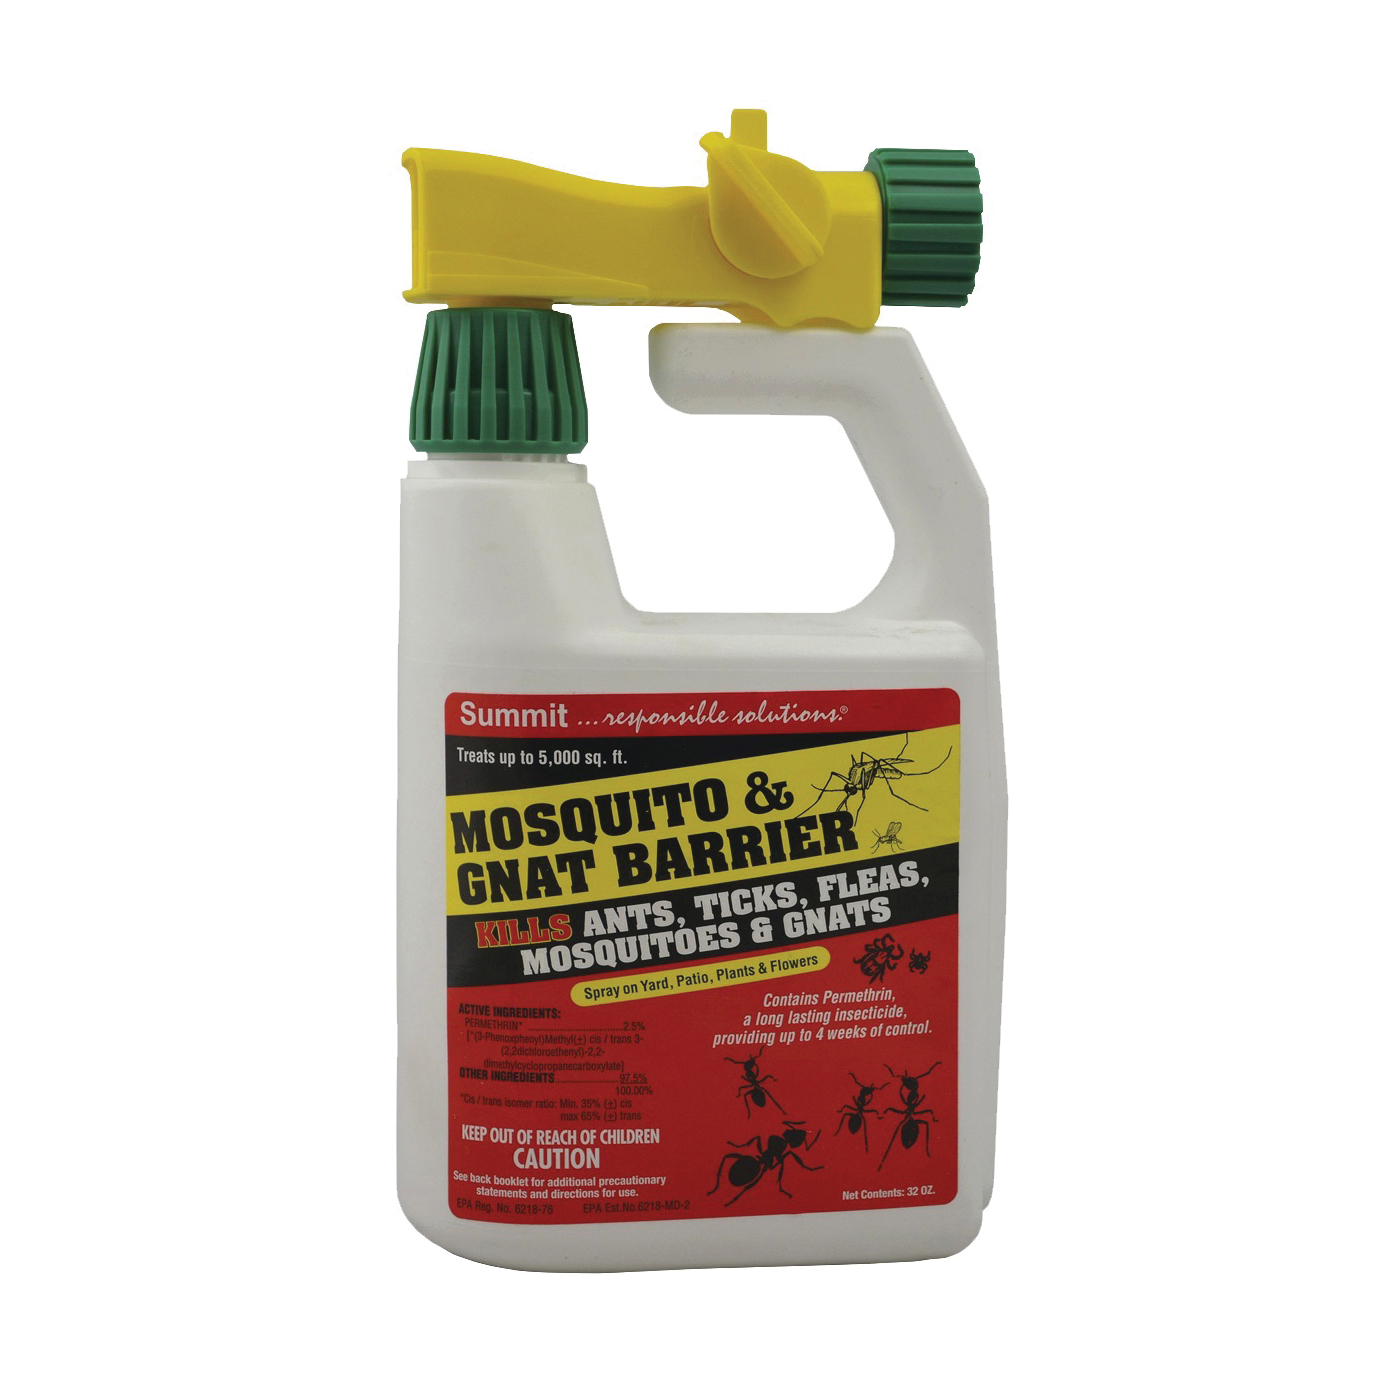 010-6 Mosquito and Gnat Barrier, Liquid, Slight Chemical, 32 oz Spray Bottle